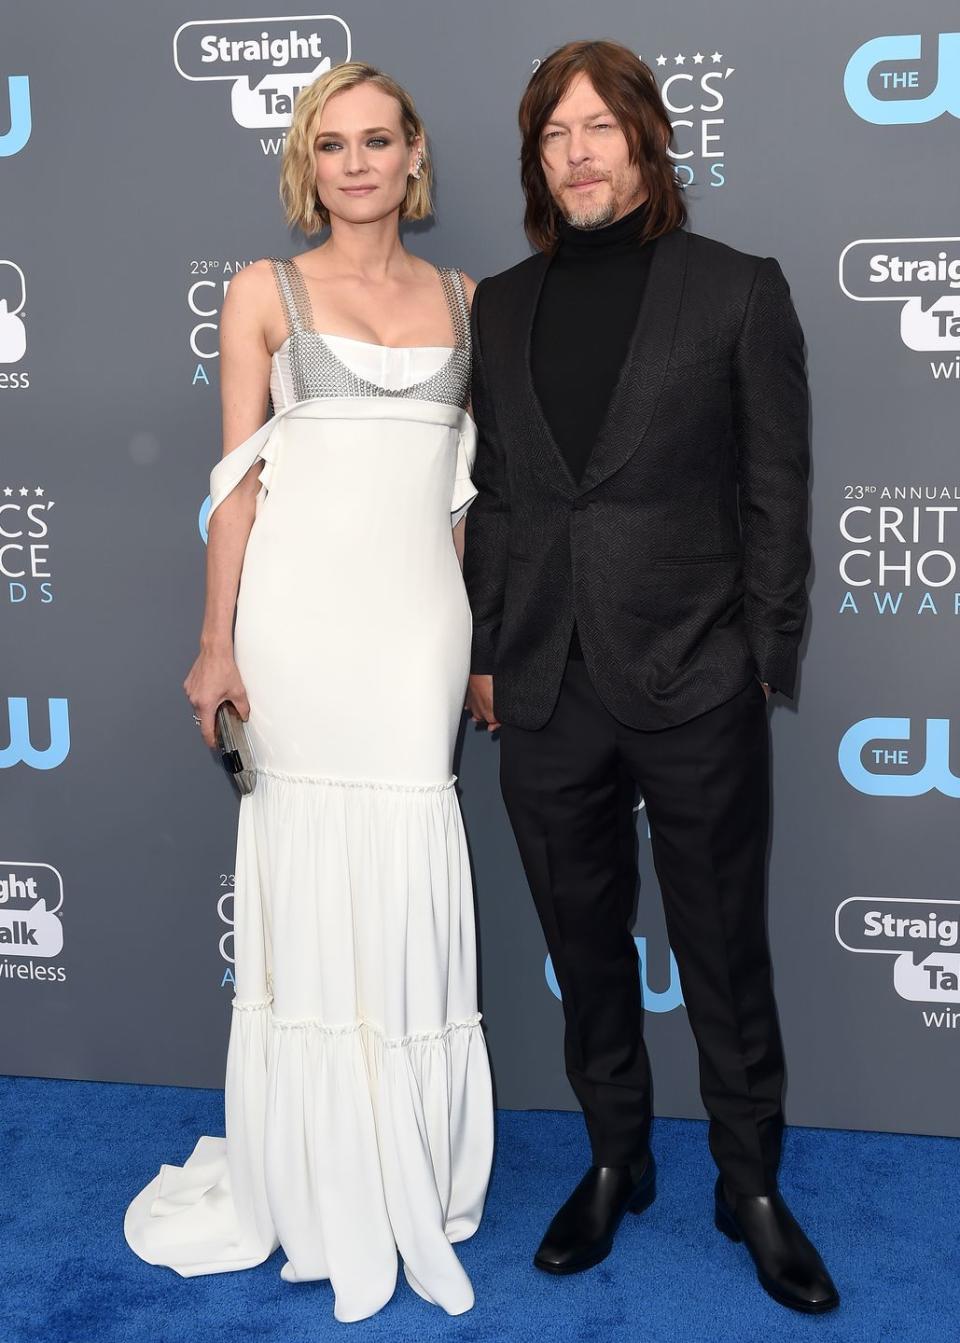 <p><strong>How long they've been together: </strong>Kruger and Reedus met in 2015 on the set of the indie film, <em>Sky</em>. Throughout the following months rumors swirled about the duo, made even more salacious as Kruger had just broken up with her boyfriend of 10 years, Joshua Jackson. They didn't make their red carpet debut until the 2018 Golden Globes. </p><p><strong>Why you forgot they're together: </strong>Between the laid-back attitude of these famous actors and the relentless speculation of whether they were together at the beginning of their relationship, it's easy to forget that they are, indeed, an item. In November 2018, the couple became parents to a baby girl, but in the interest of privacy, have not revealed any details. <strong><br></strong></p>